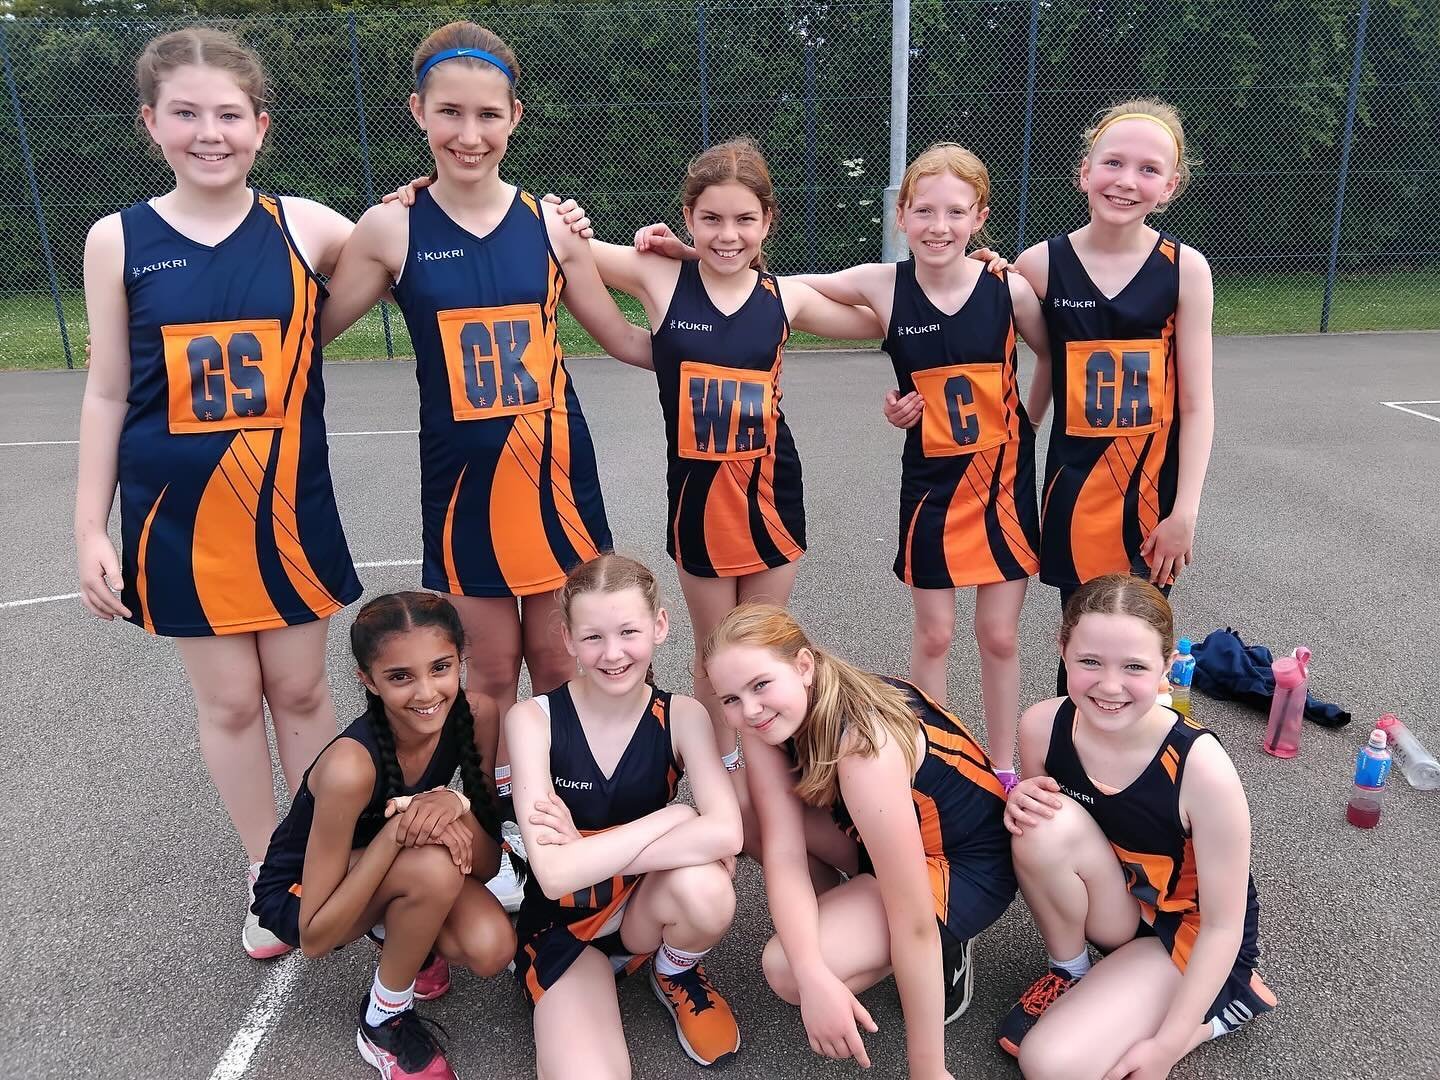 Great performance from the u11s today in the Herts tournament.  Despite 5 girls carrying injuries, they fought well all day, showcasing some great netball and showed their versatility across the court. Well.played girls, the coach is off to refill th